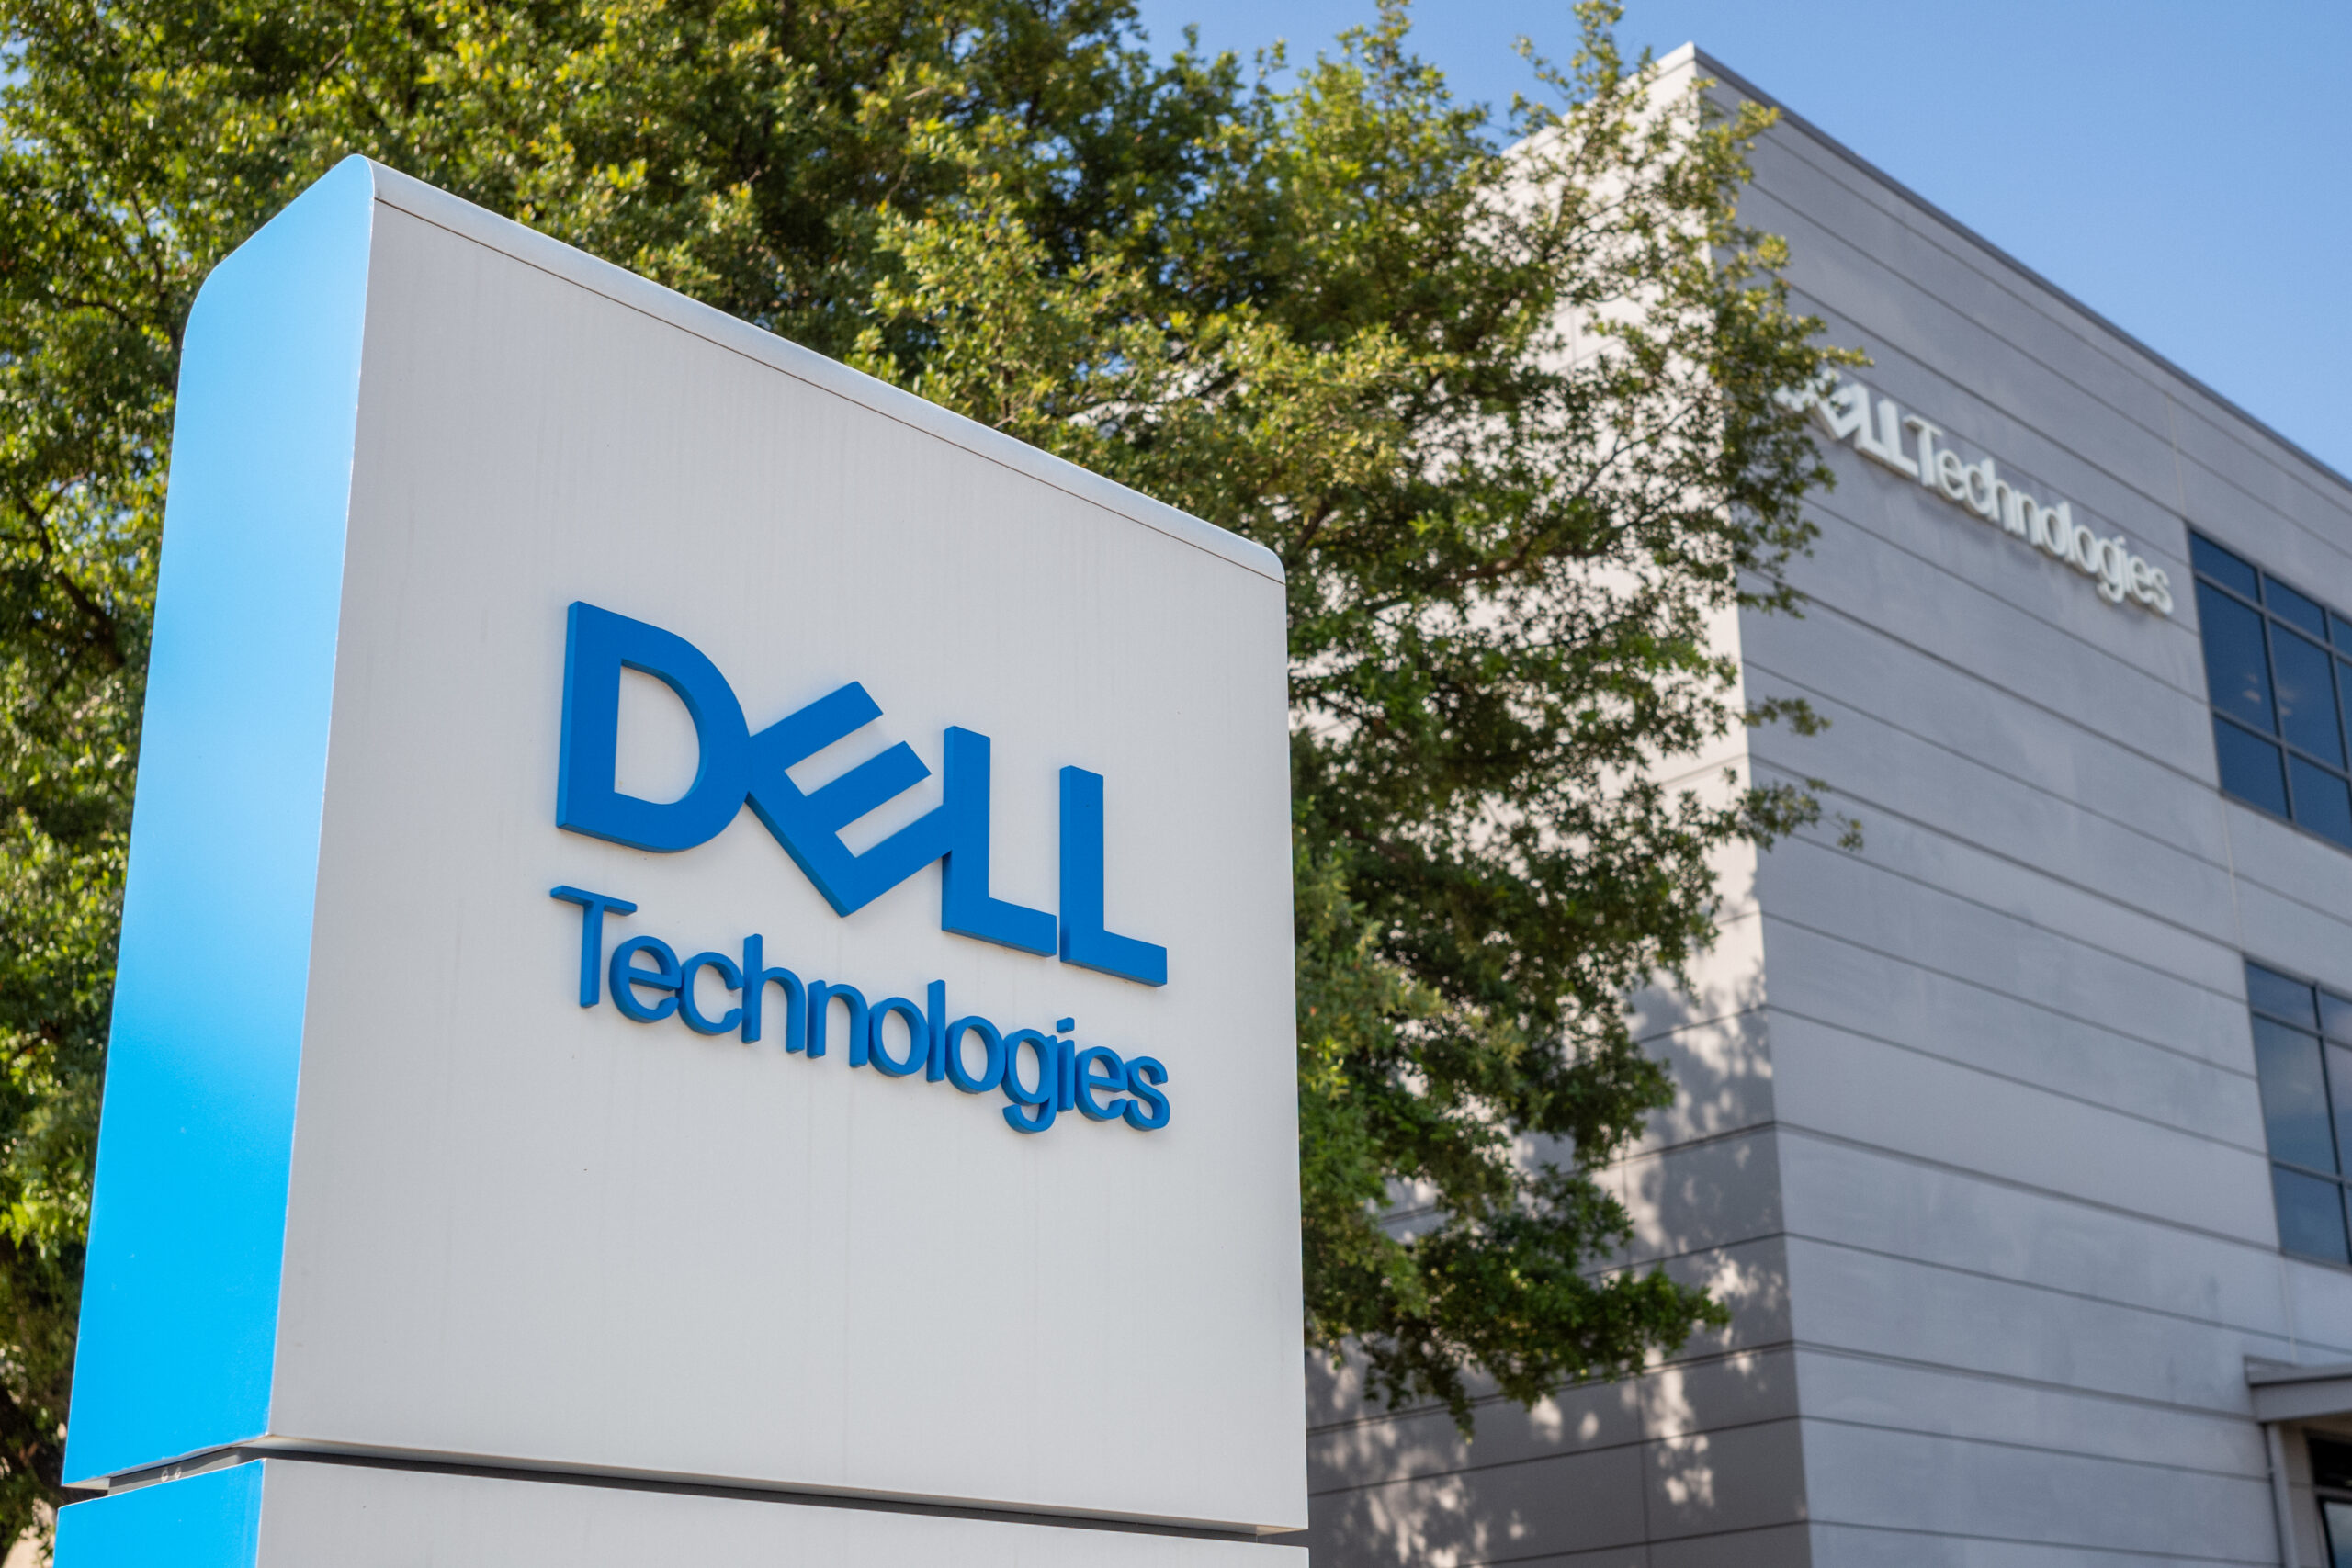 Dell Employees Working Remotely Won’t Be Considered for Promotions